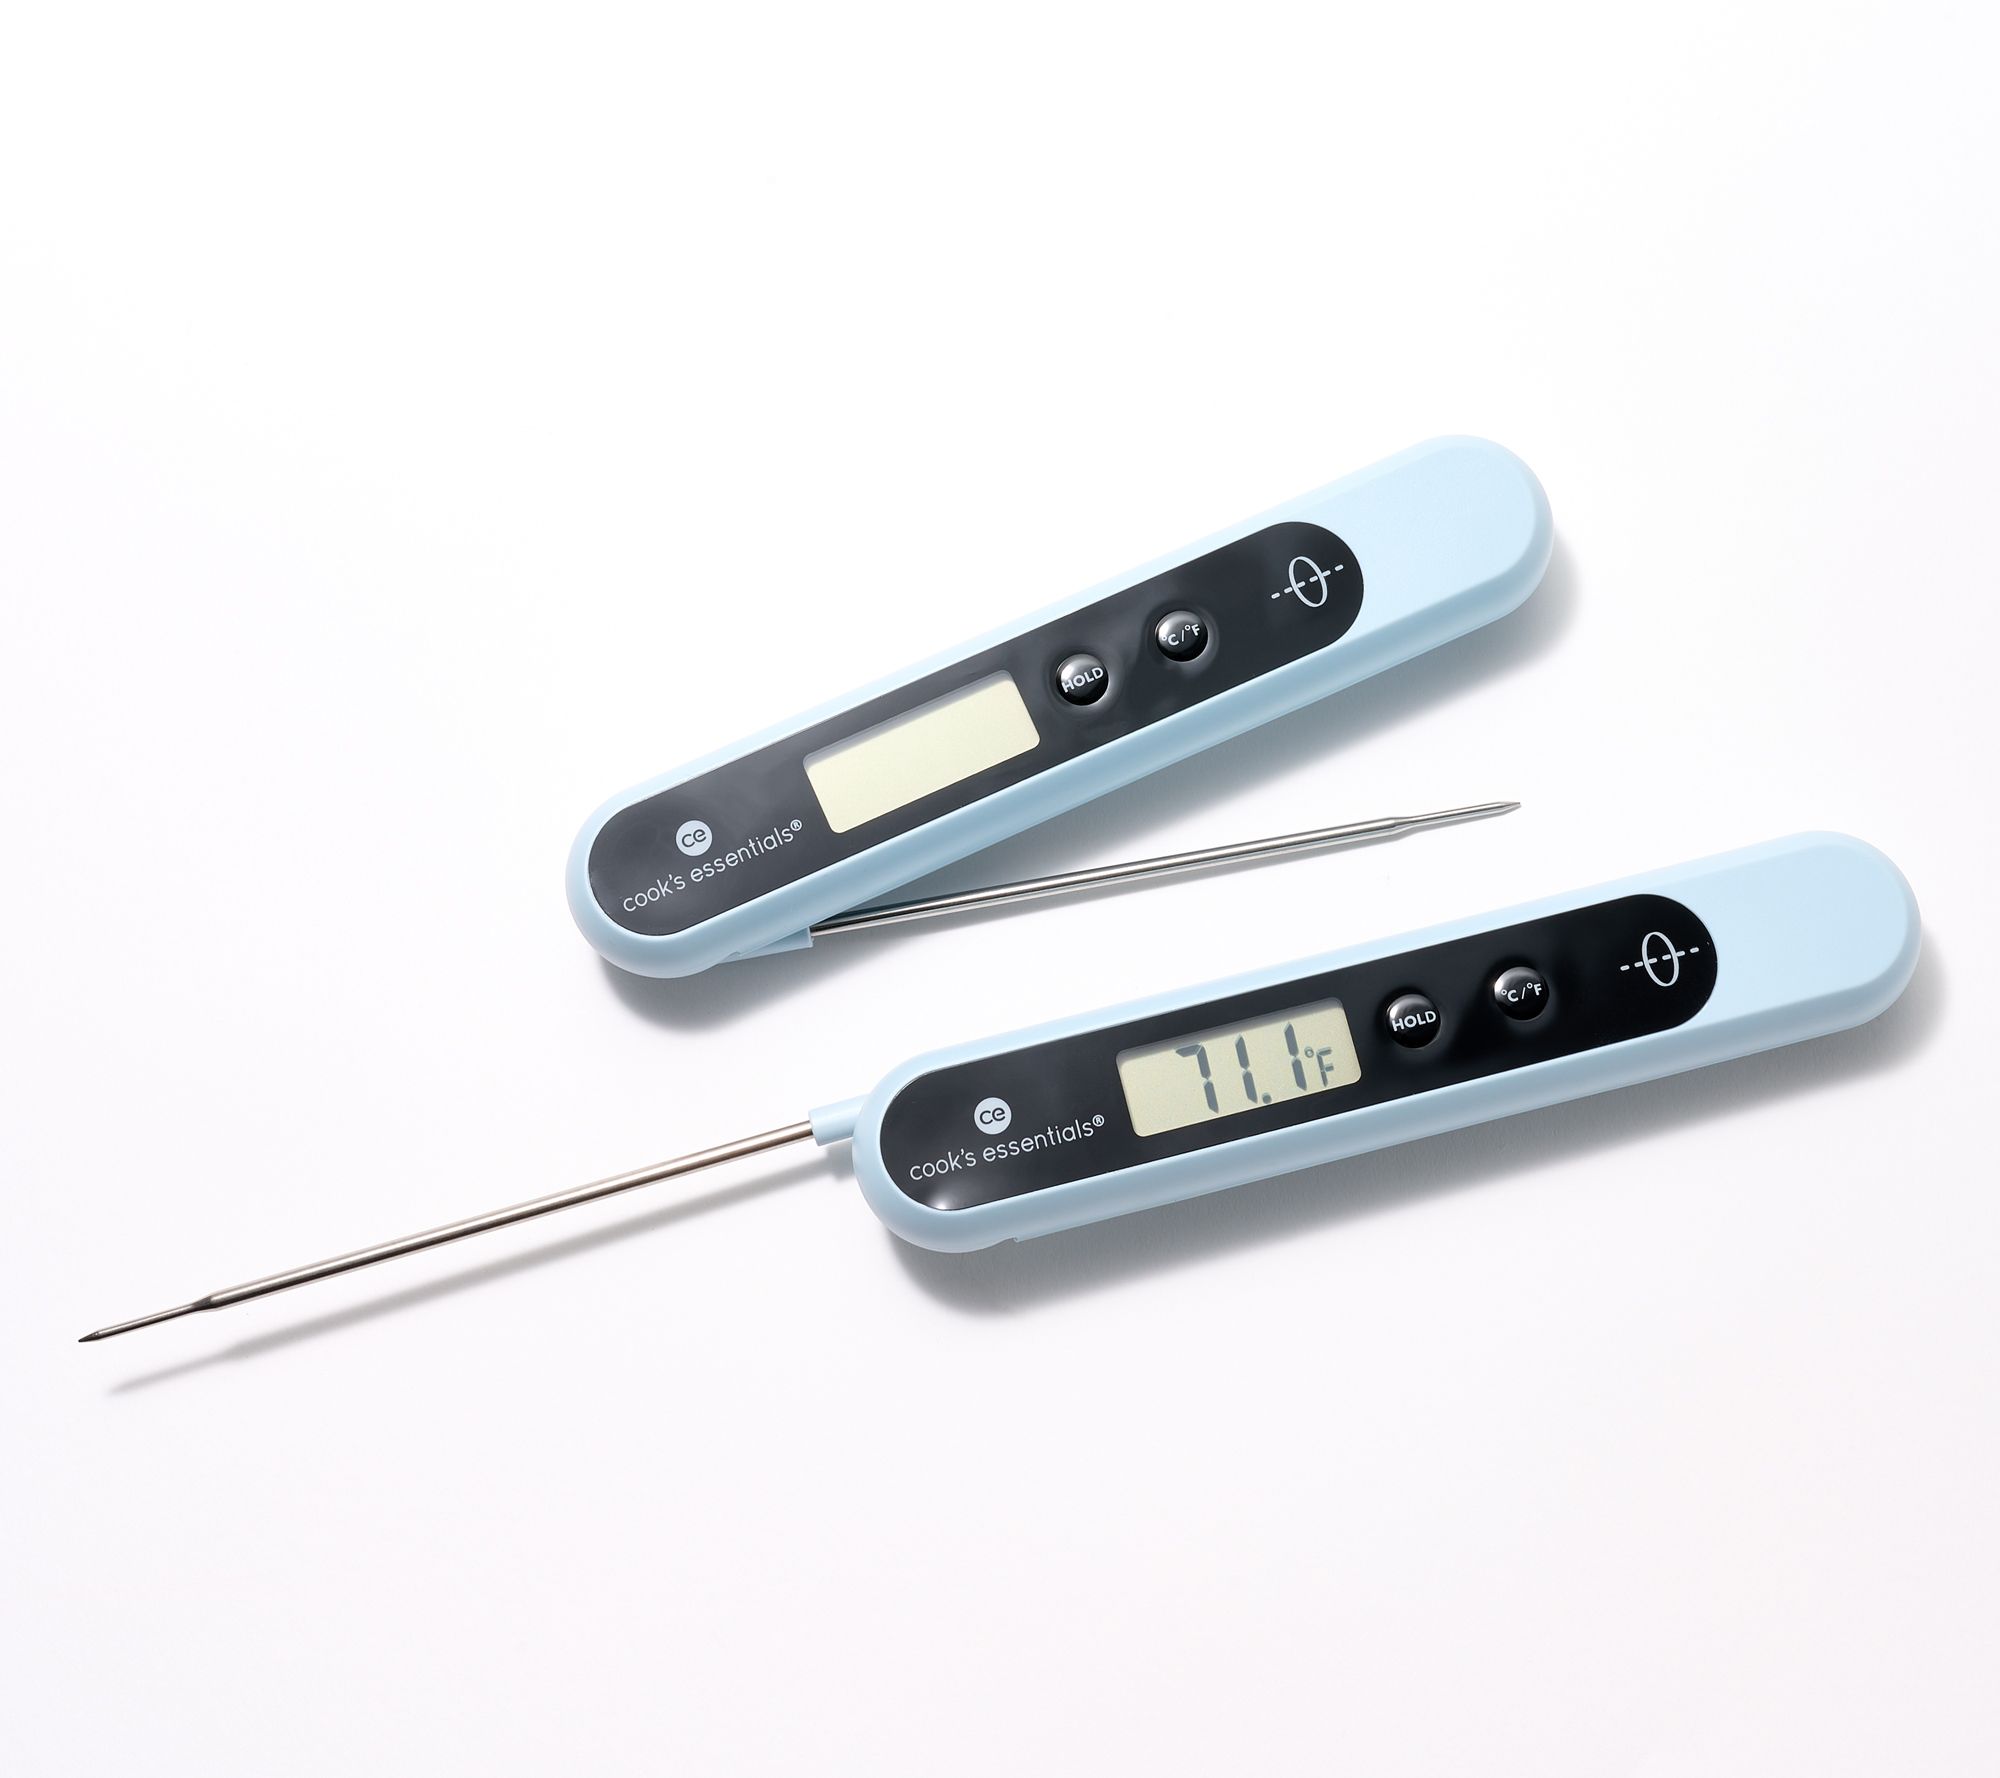 Outset Digital Wireless Thermometer Probe